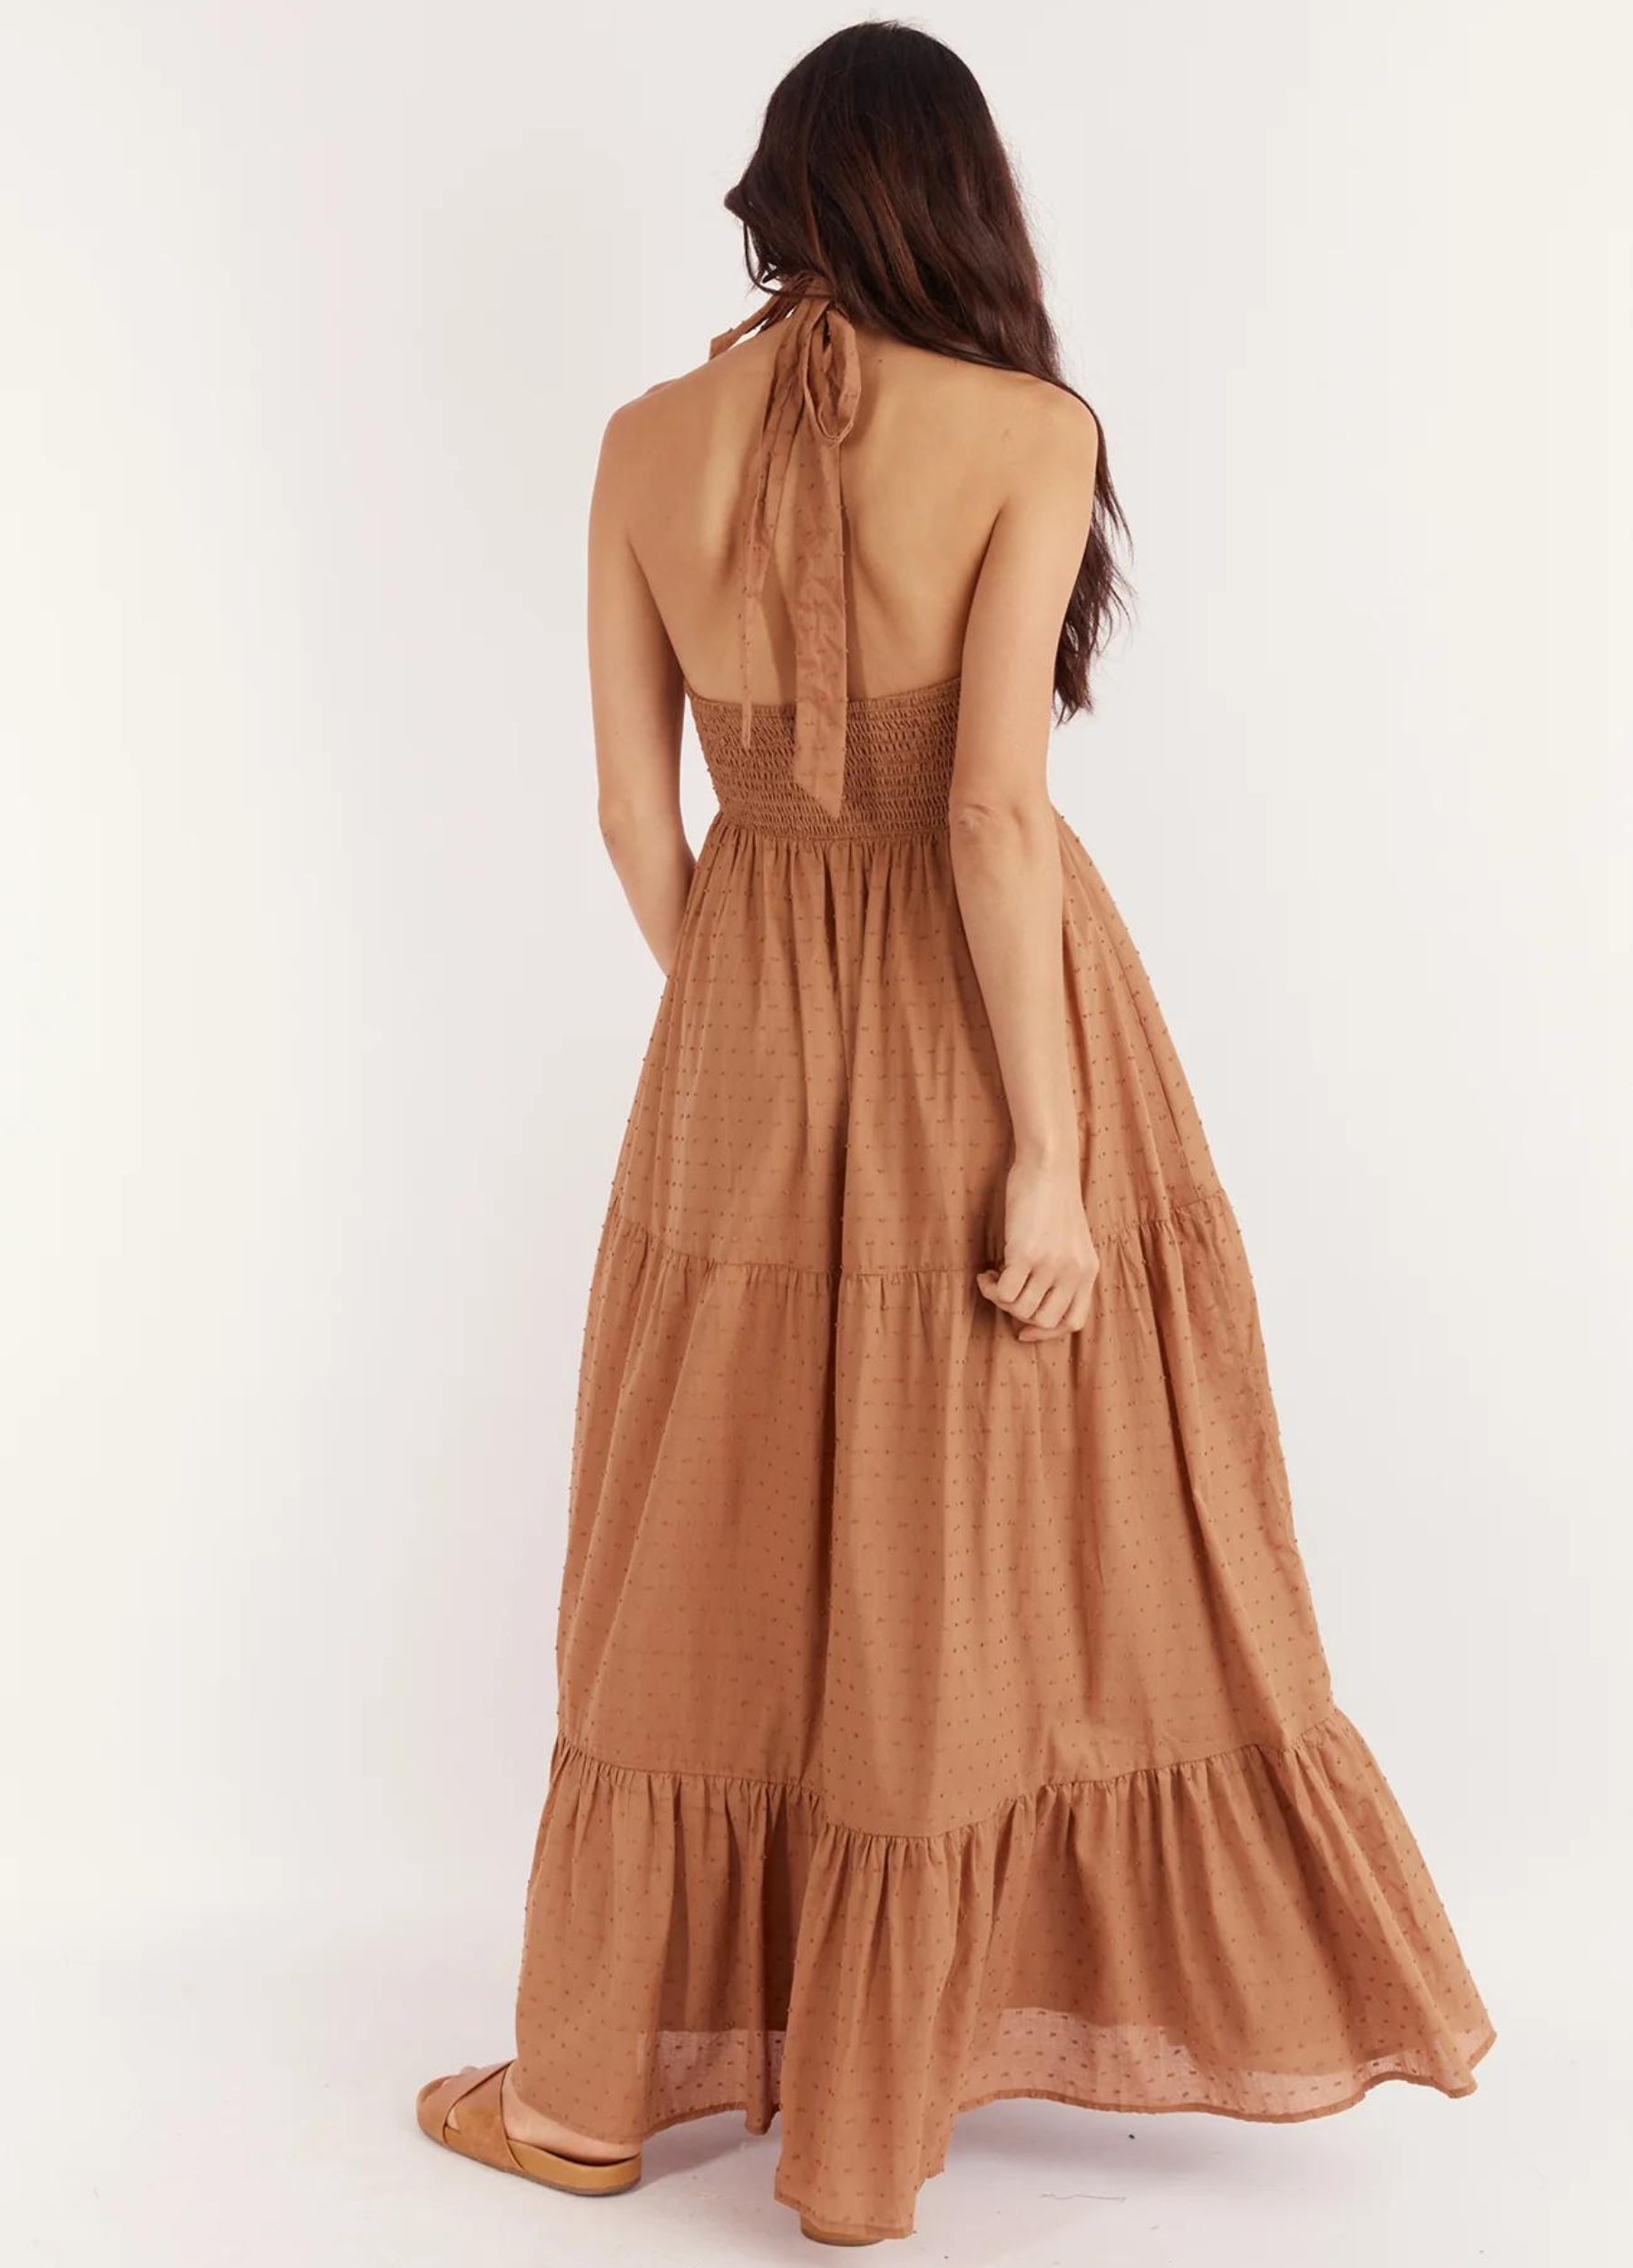 Halterneck maxi dress in brown spot print fabric with a back neck tie